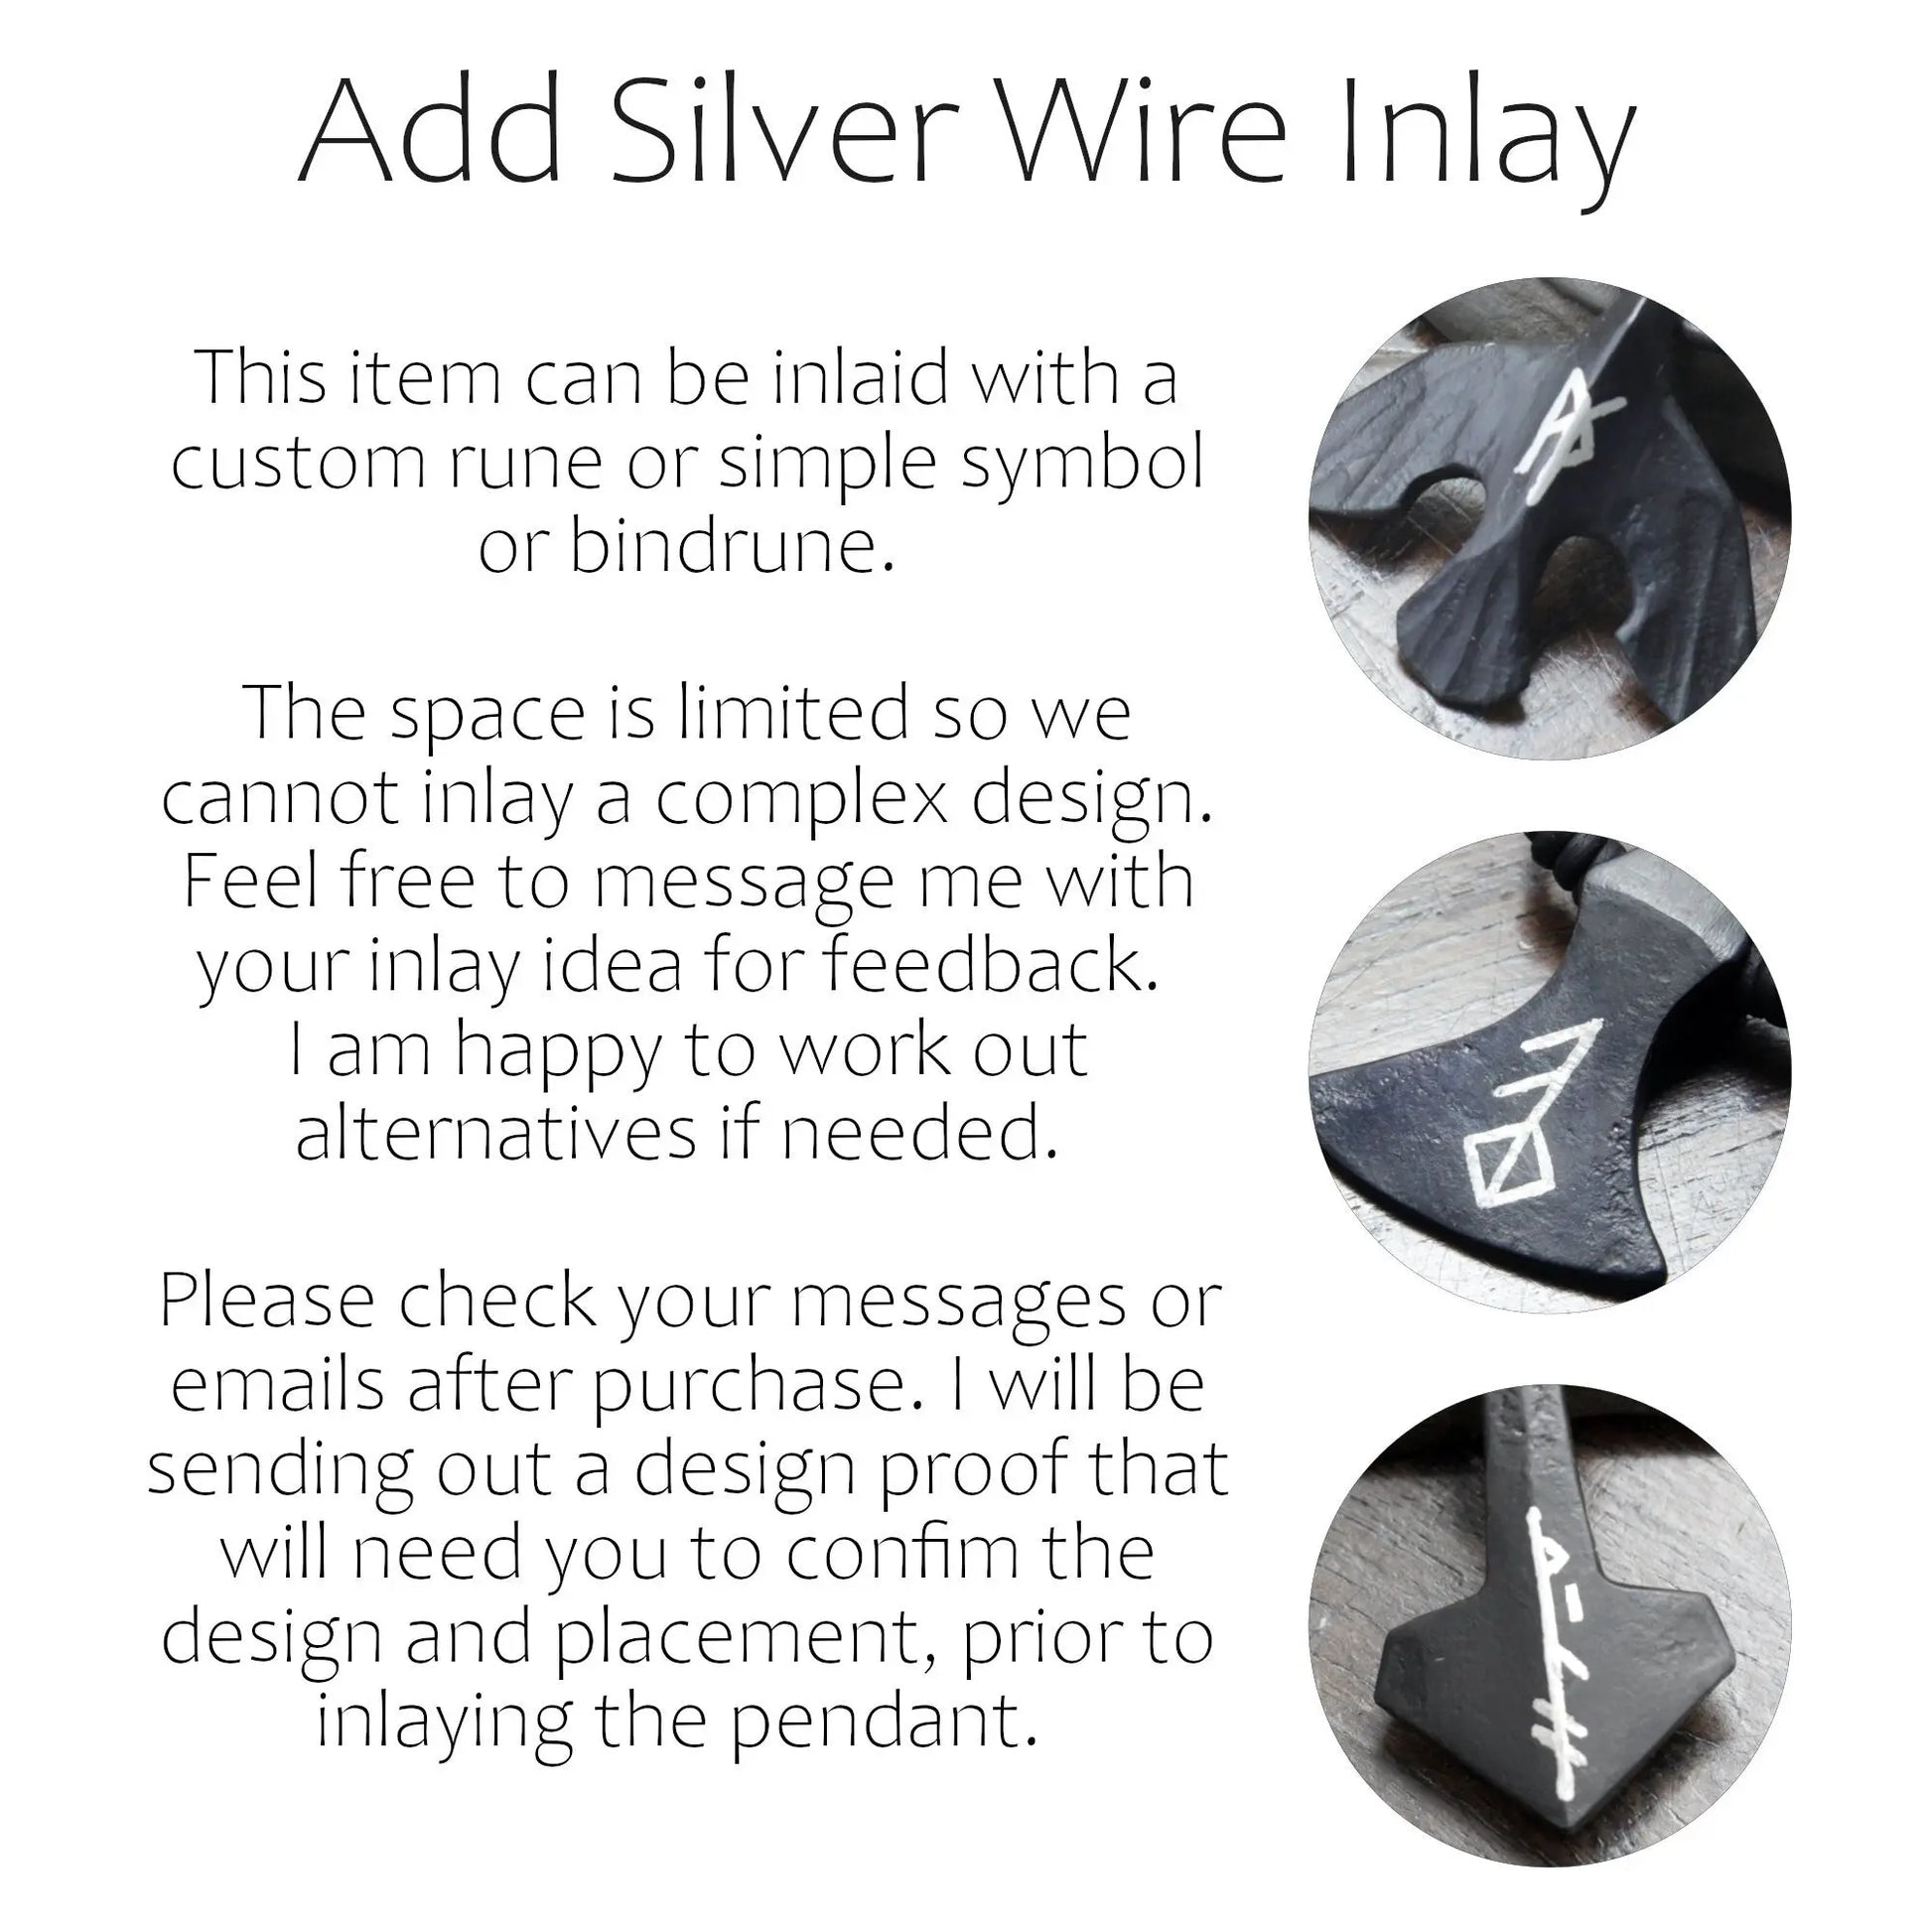 Information on Taitaya Forge Silver Inlay customisation. This item can be inlaid with a custom rune or simple symbol or bindrune. The space is limited so we cannot inlay a complex design. Feel free to message me with your inlay idea for feedback. I am happy to work out alternatives if needed. Please check your messages or emails after purchase. I will be sending out a design proof that will need you to confim the design and placement, prior to inlaying the pendant. 